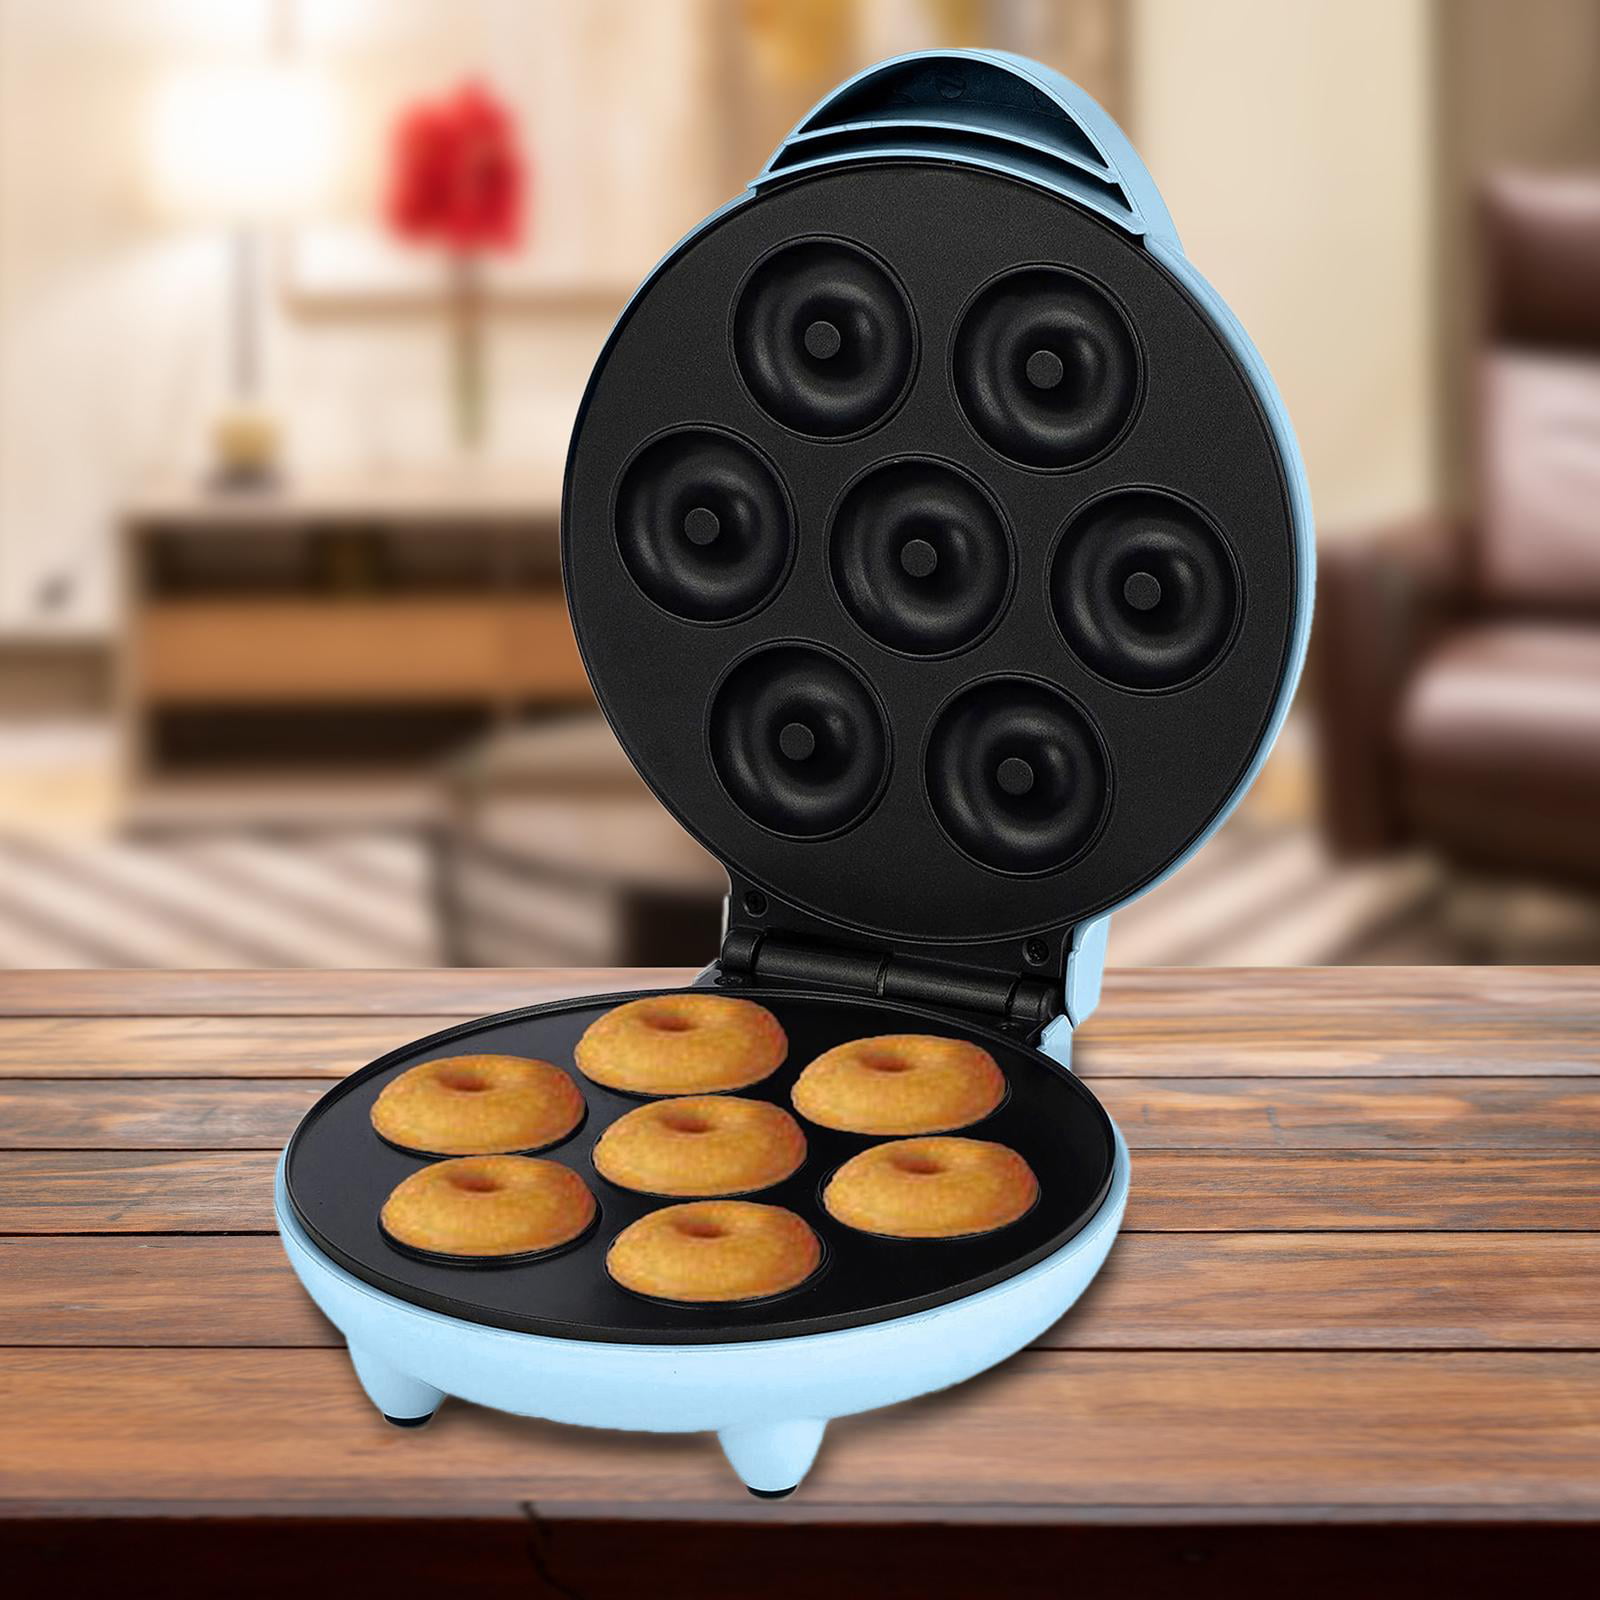 Mini Donut Maker Machine Small Doughnut Maker Electric Non-Stick Surface  Makes 7 Small Doughnuts Multifunctional Snack Maker With Nonstick Look for